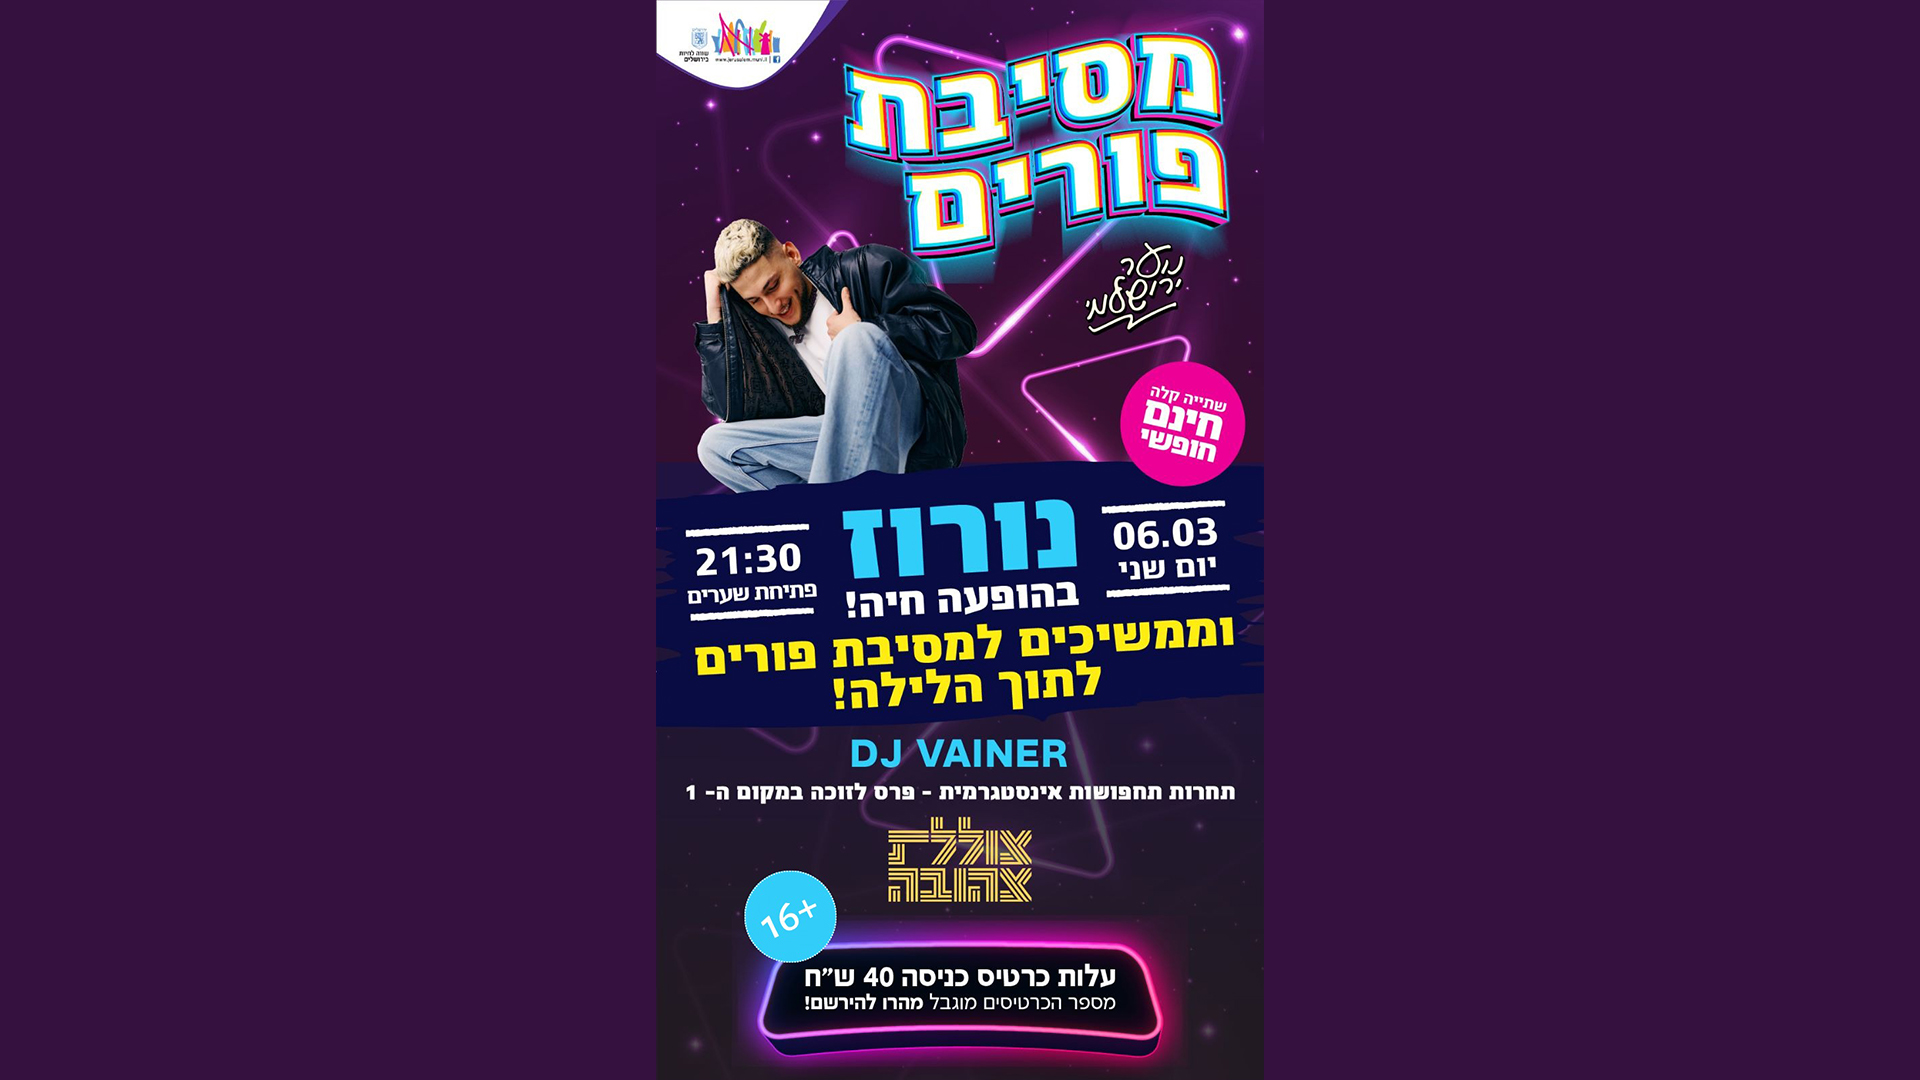 Purim party for Jerusalem teenagers!